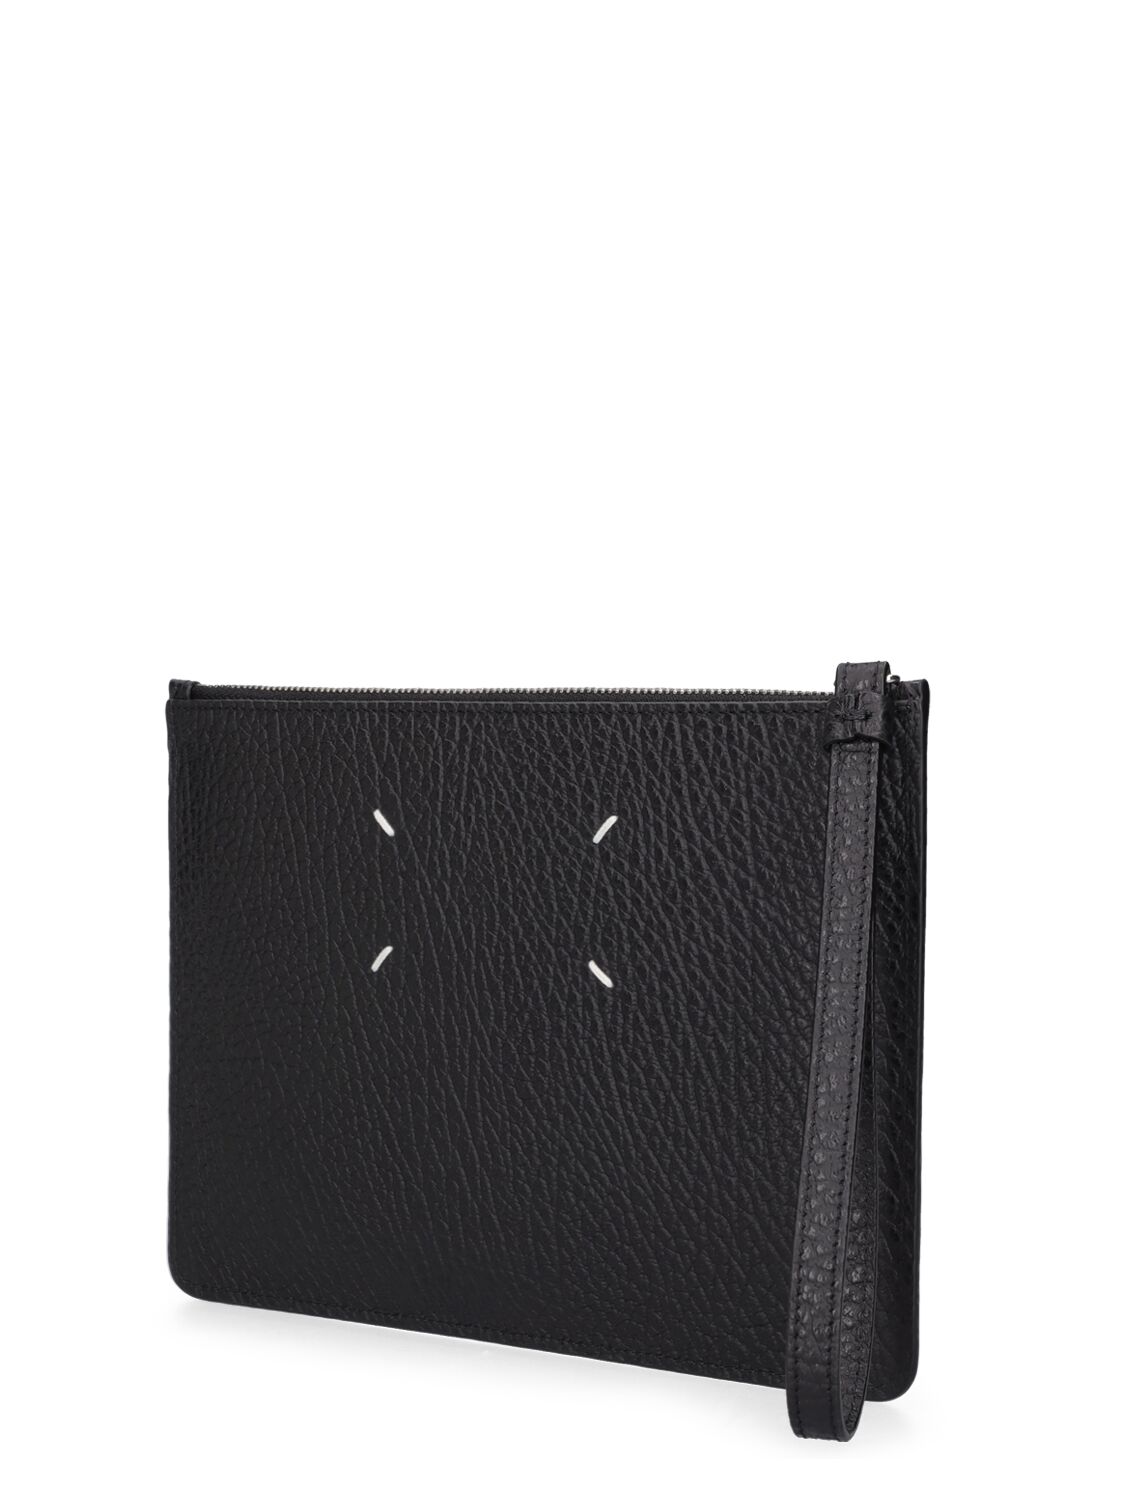 Shop Maison Margiela Small Grained Leather Pouch In Black